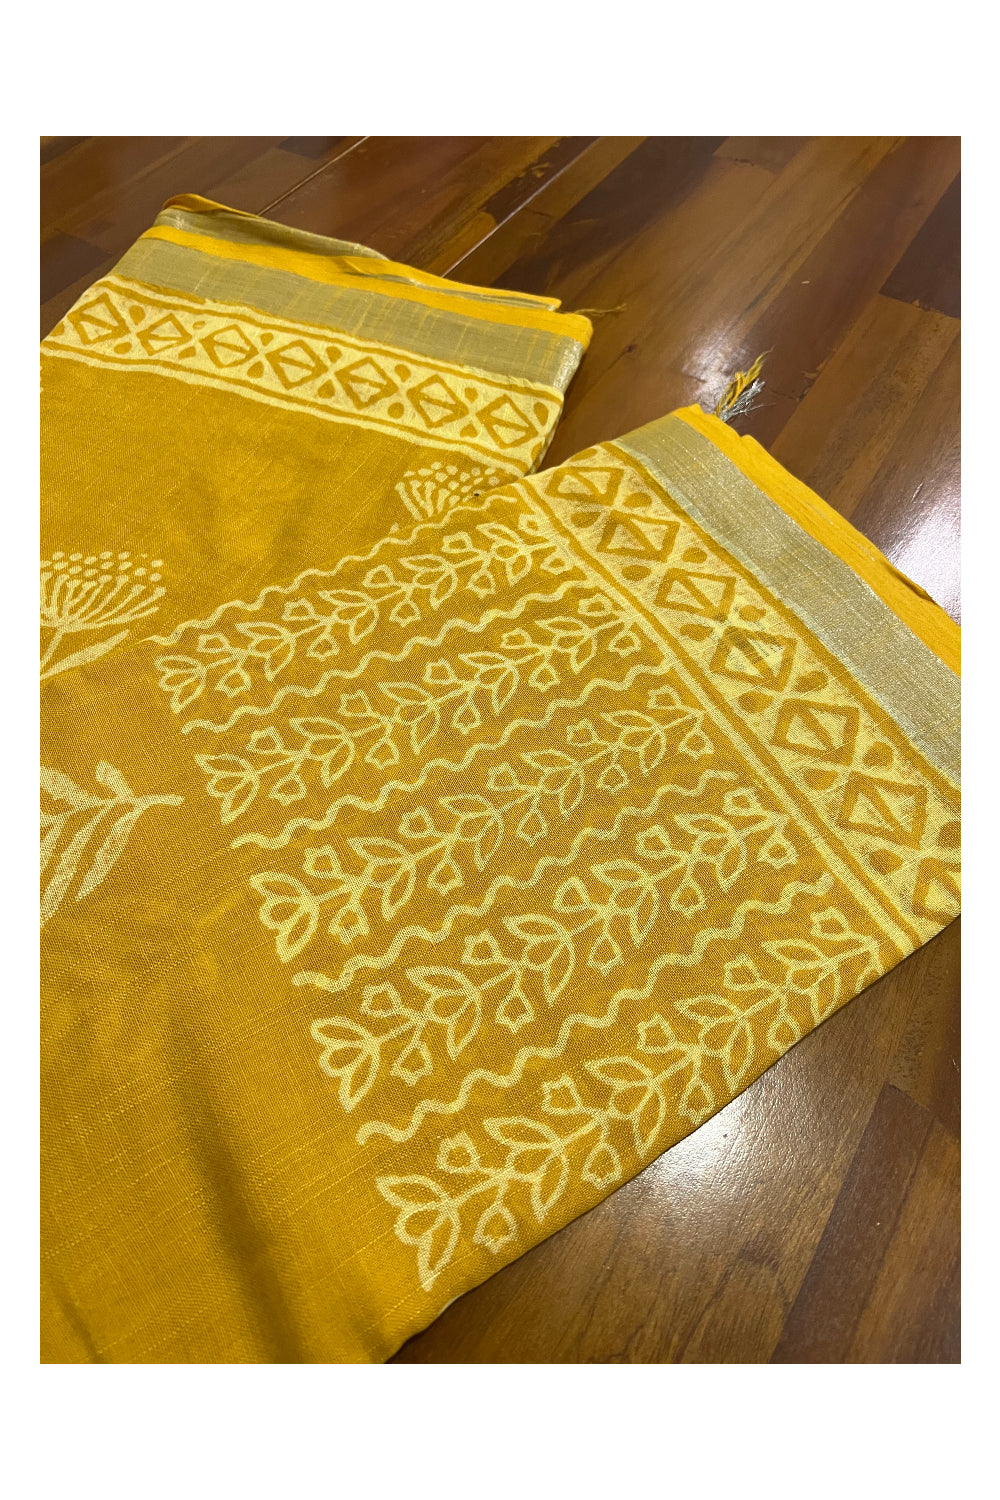 Southloom Linen Yellow Designer Saree with White Prints and Tassels on Pallu